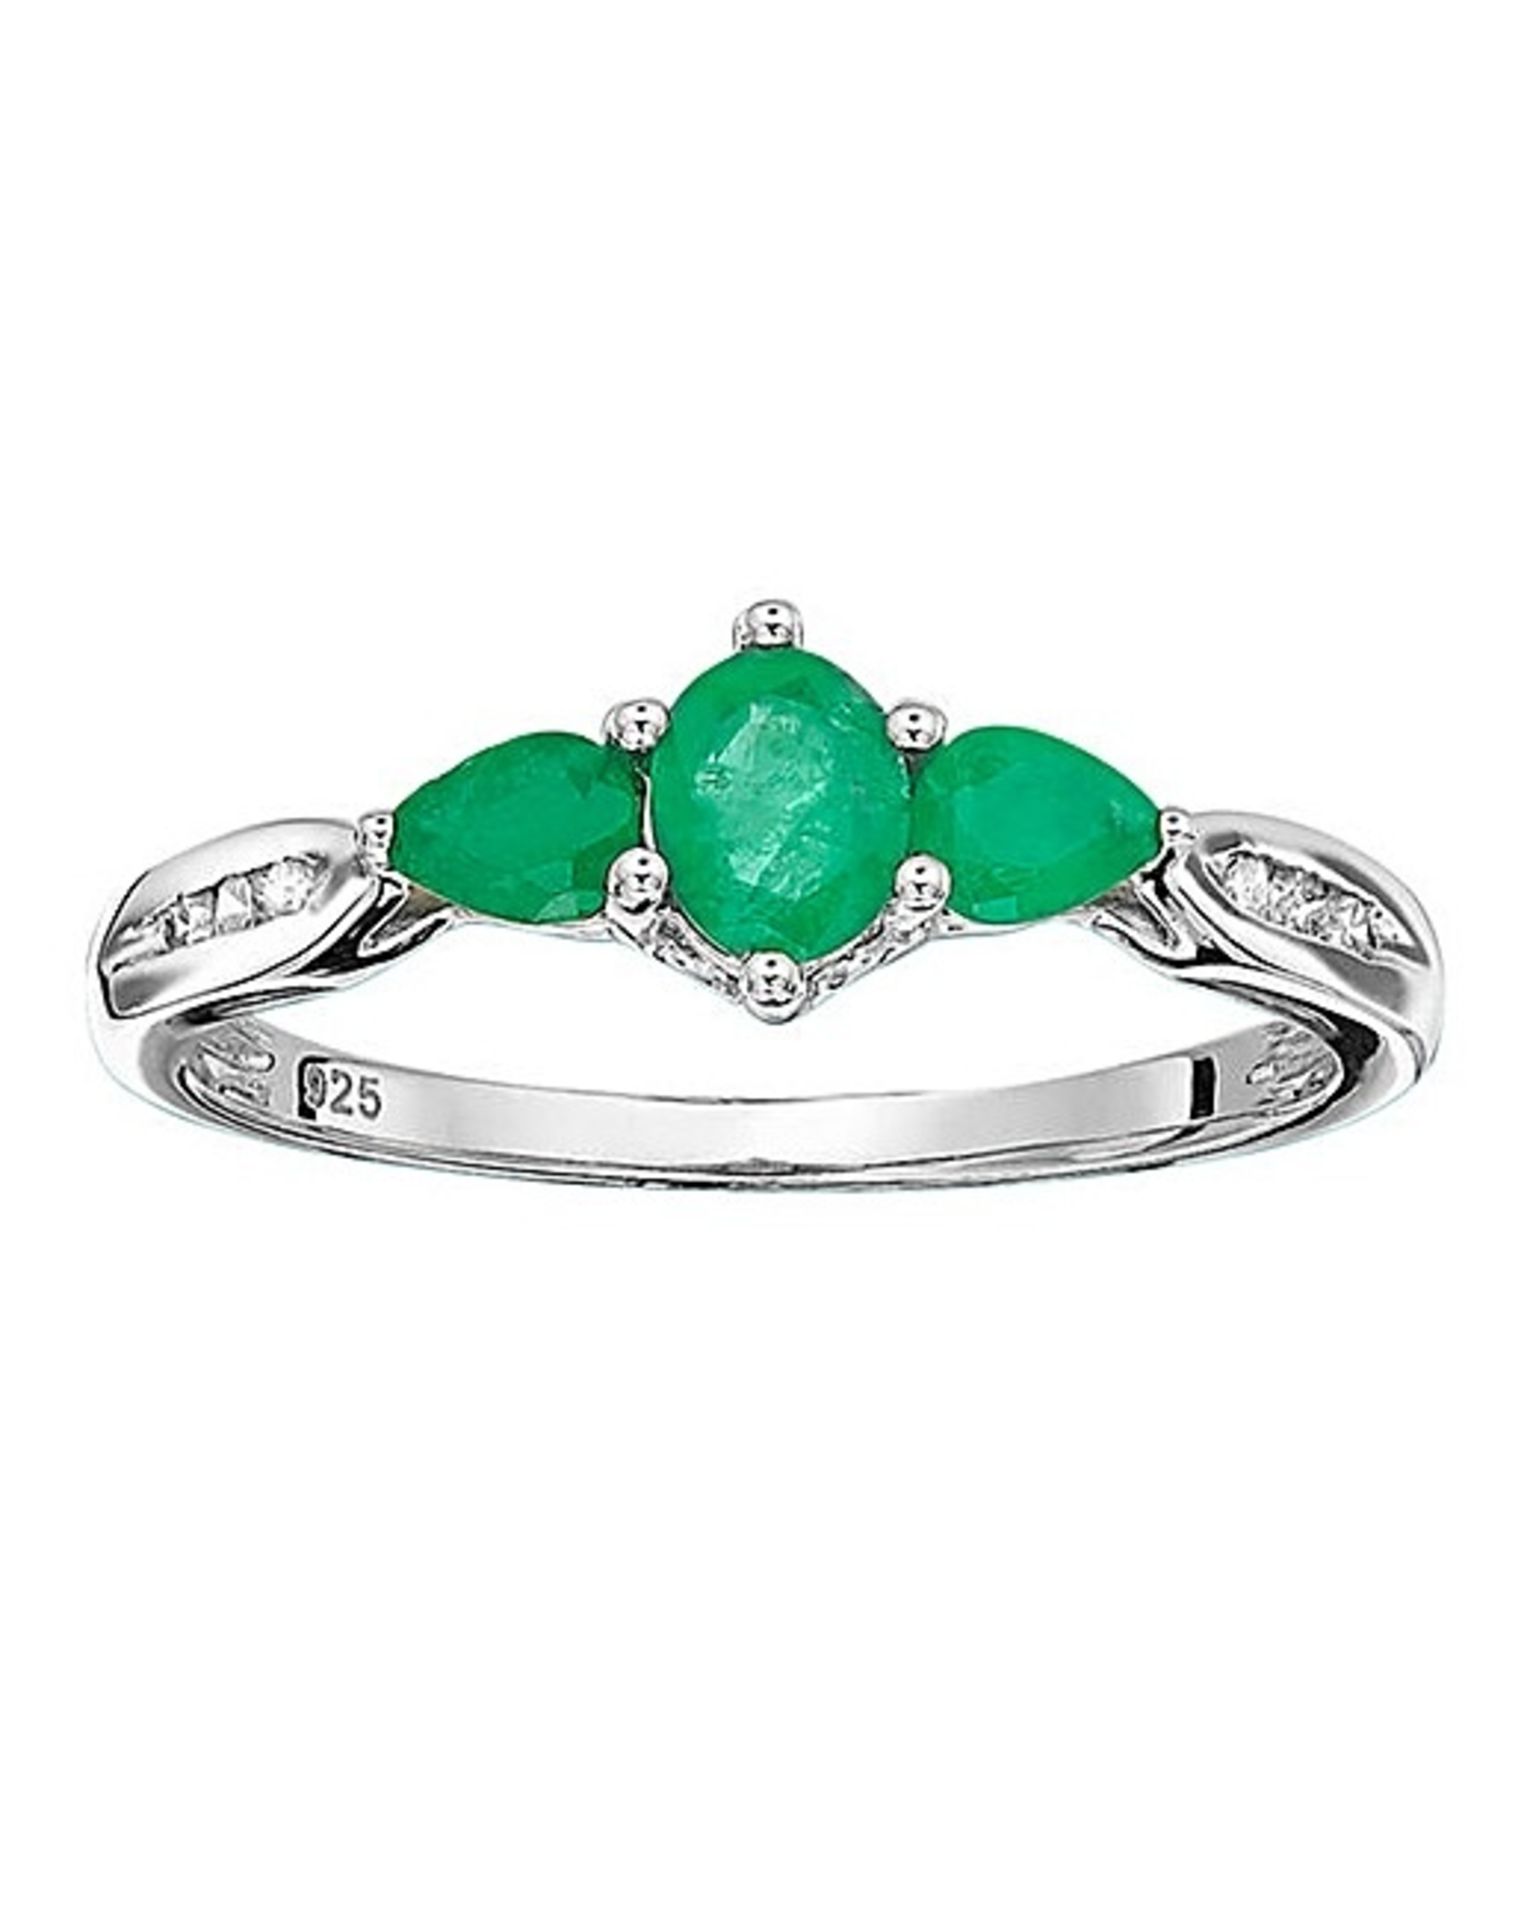 This stunning 925 Solid Sterling Silver ring set with Emerald & White Topaz is a beautiful piece